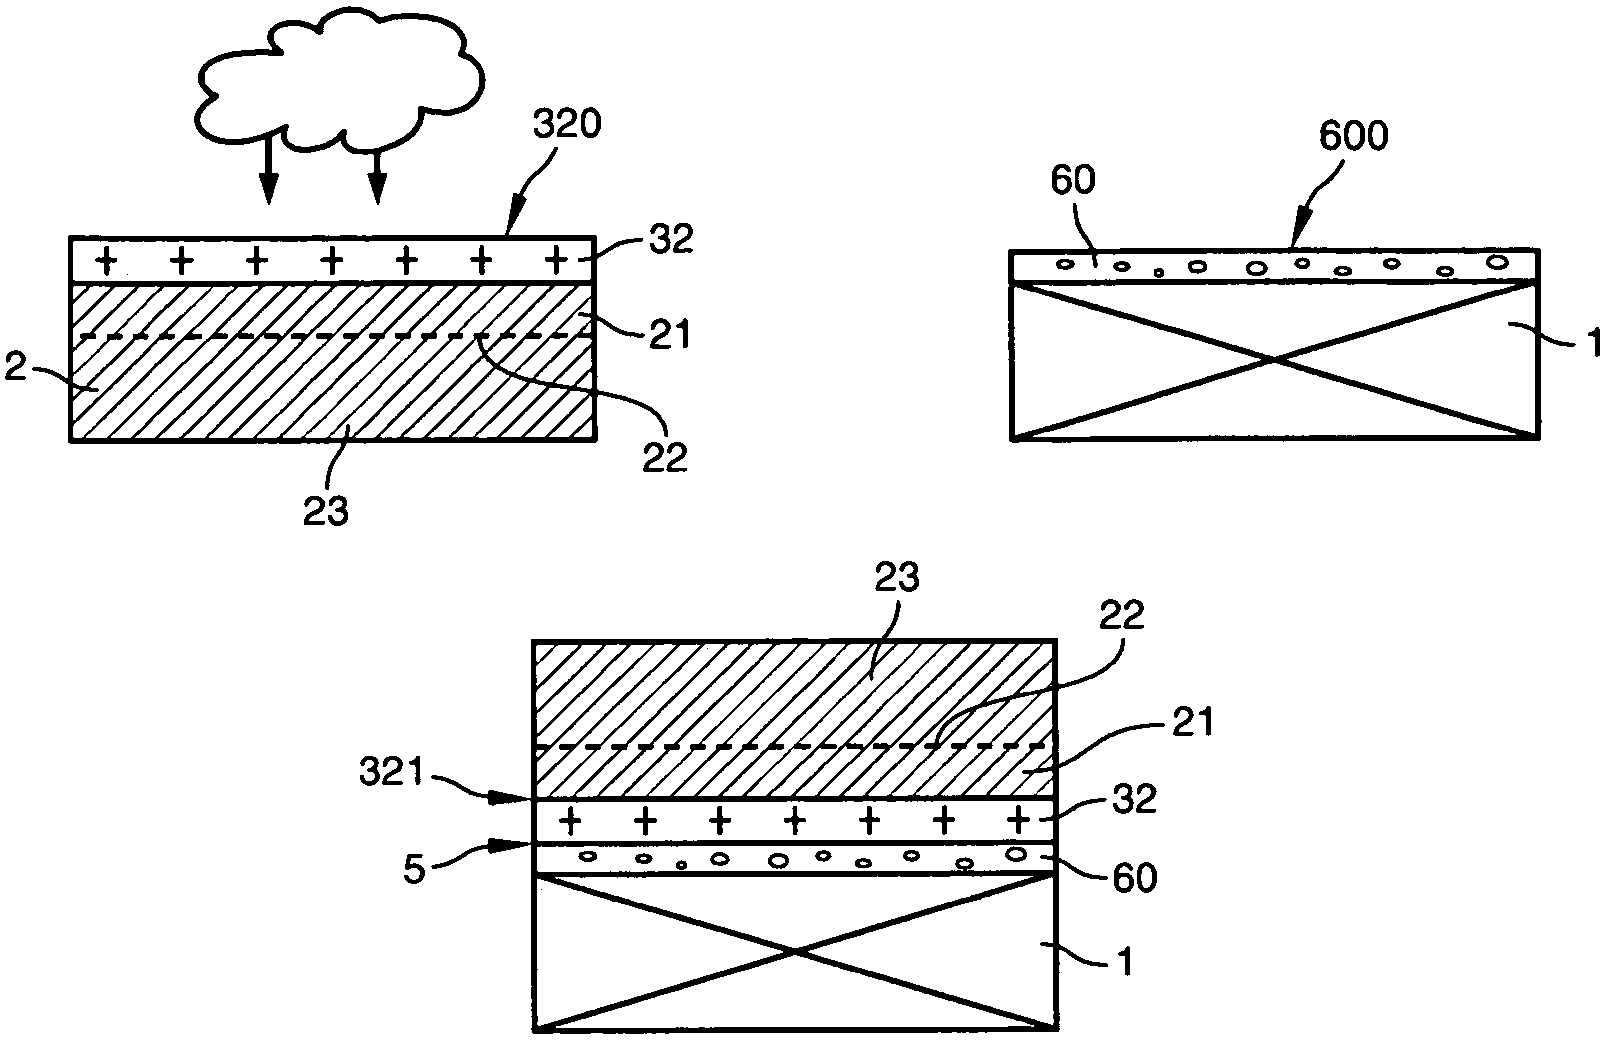 Method of fabricating a composite substrate with improved electrical properties